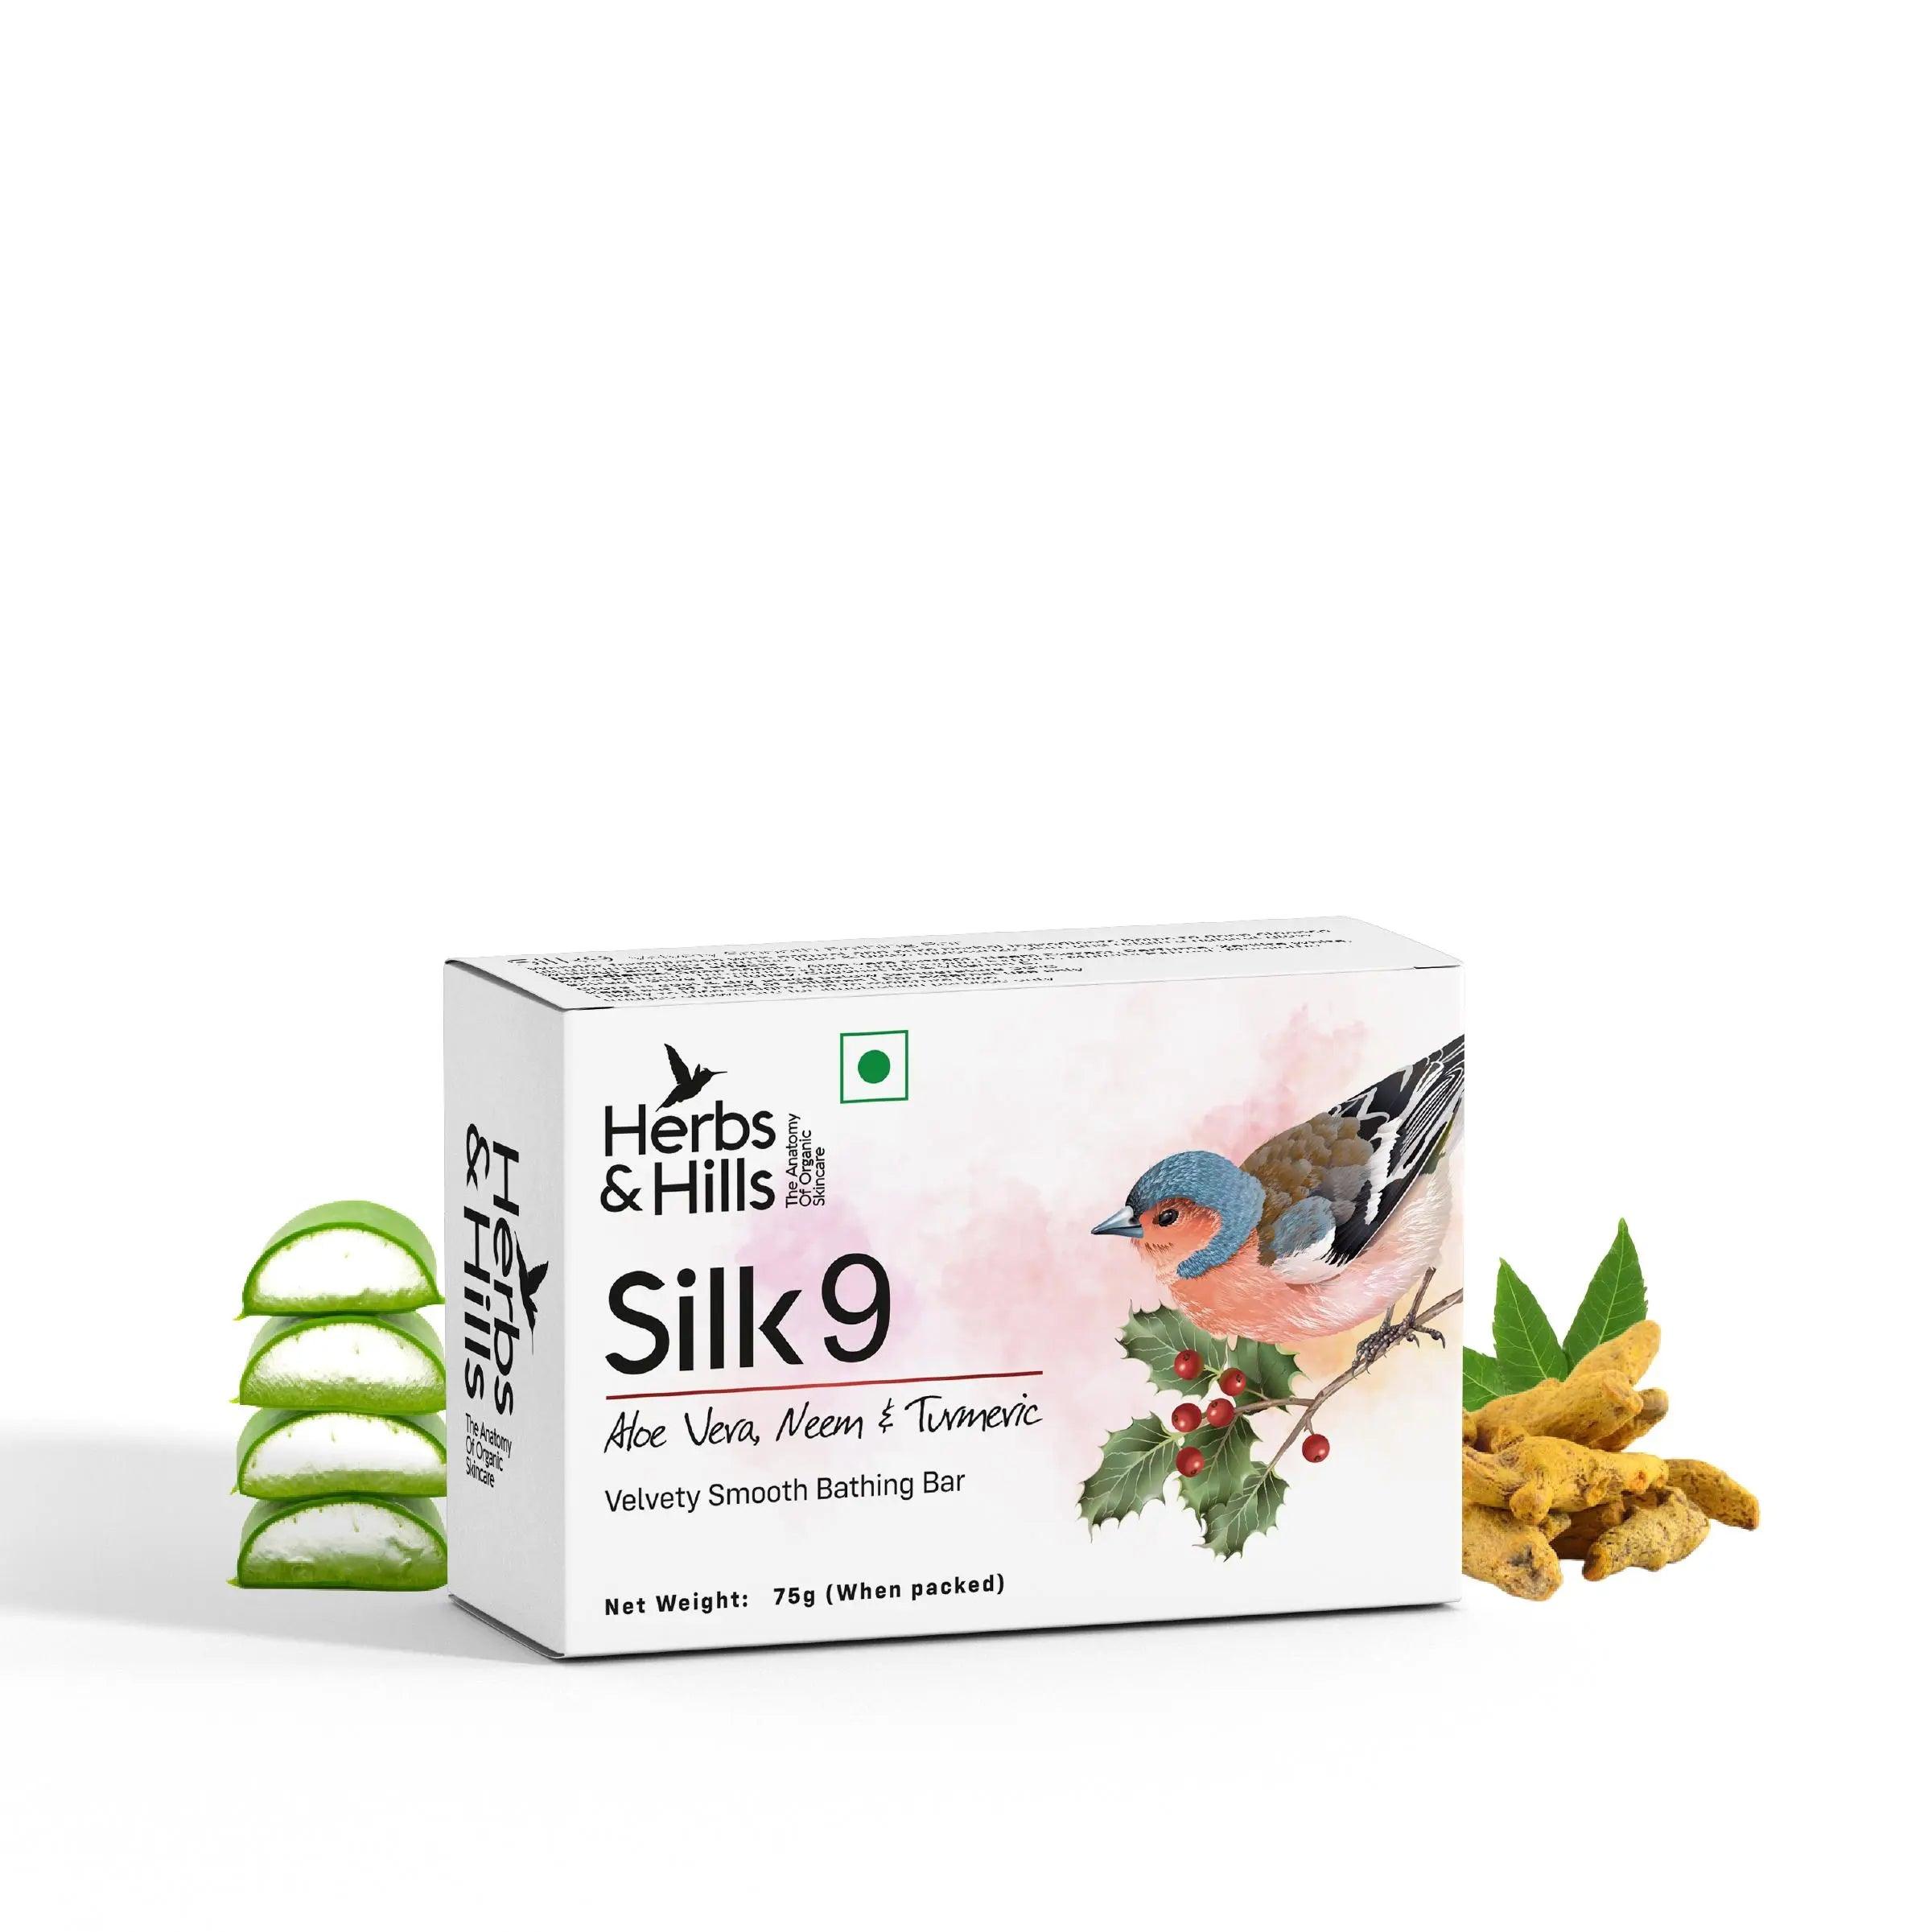 Silk9 Velvety Smooth Bathing Bar - Pack of 3 (Each 99 Rs. & 75 gm) - HERBS AND HILLS